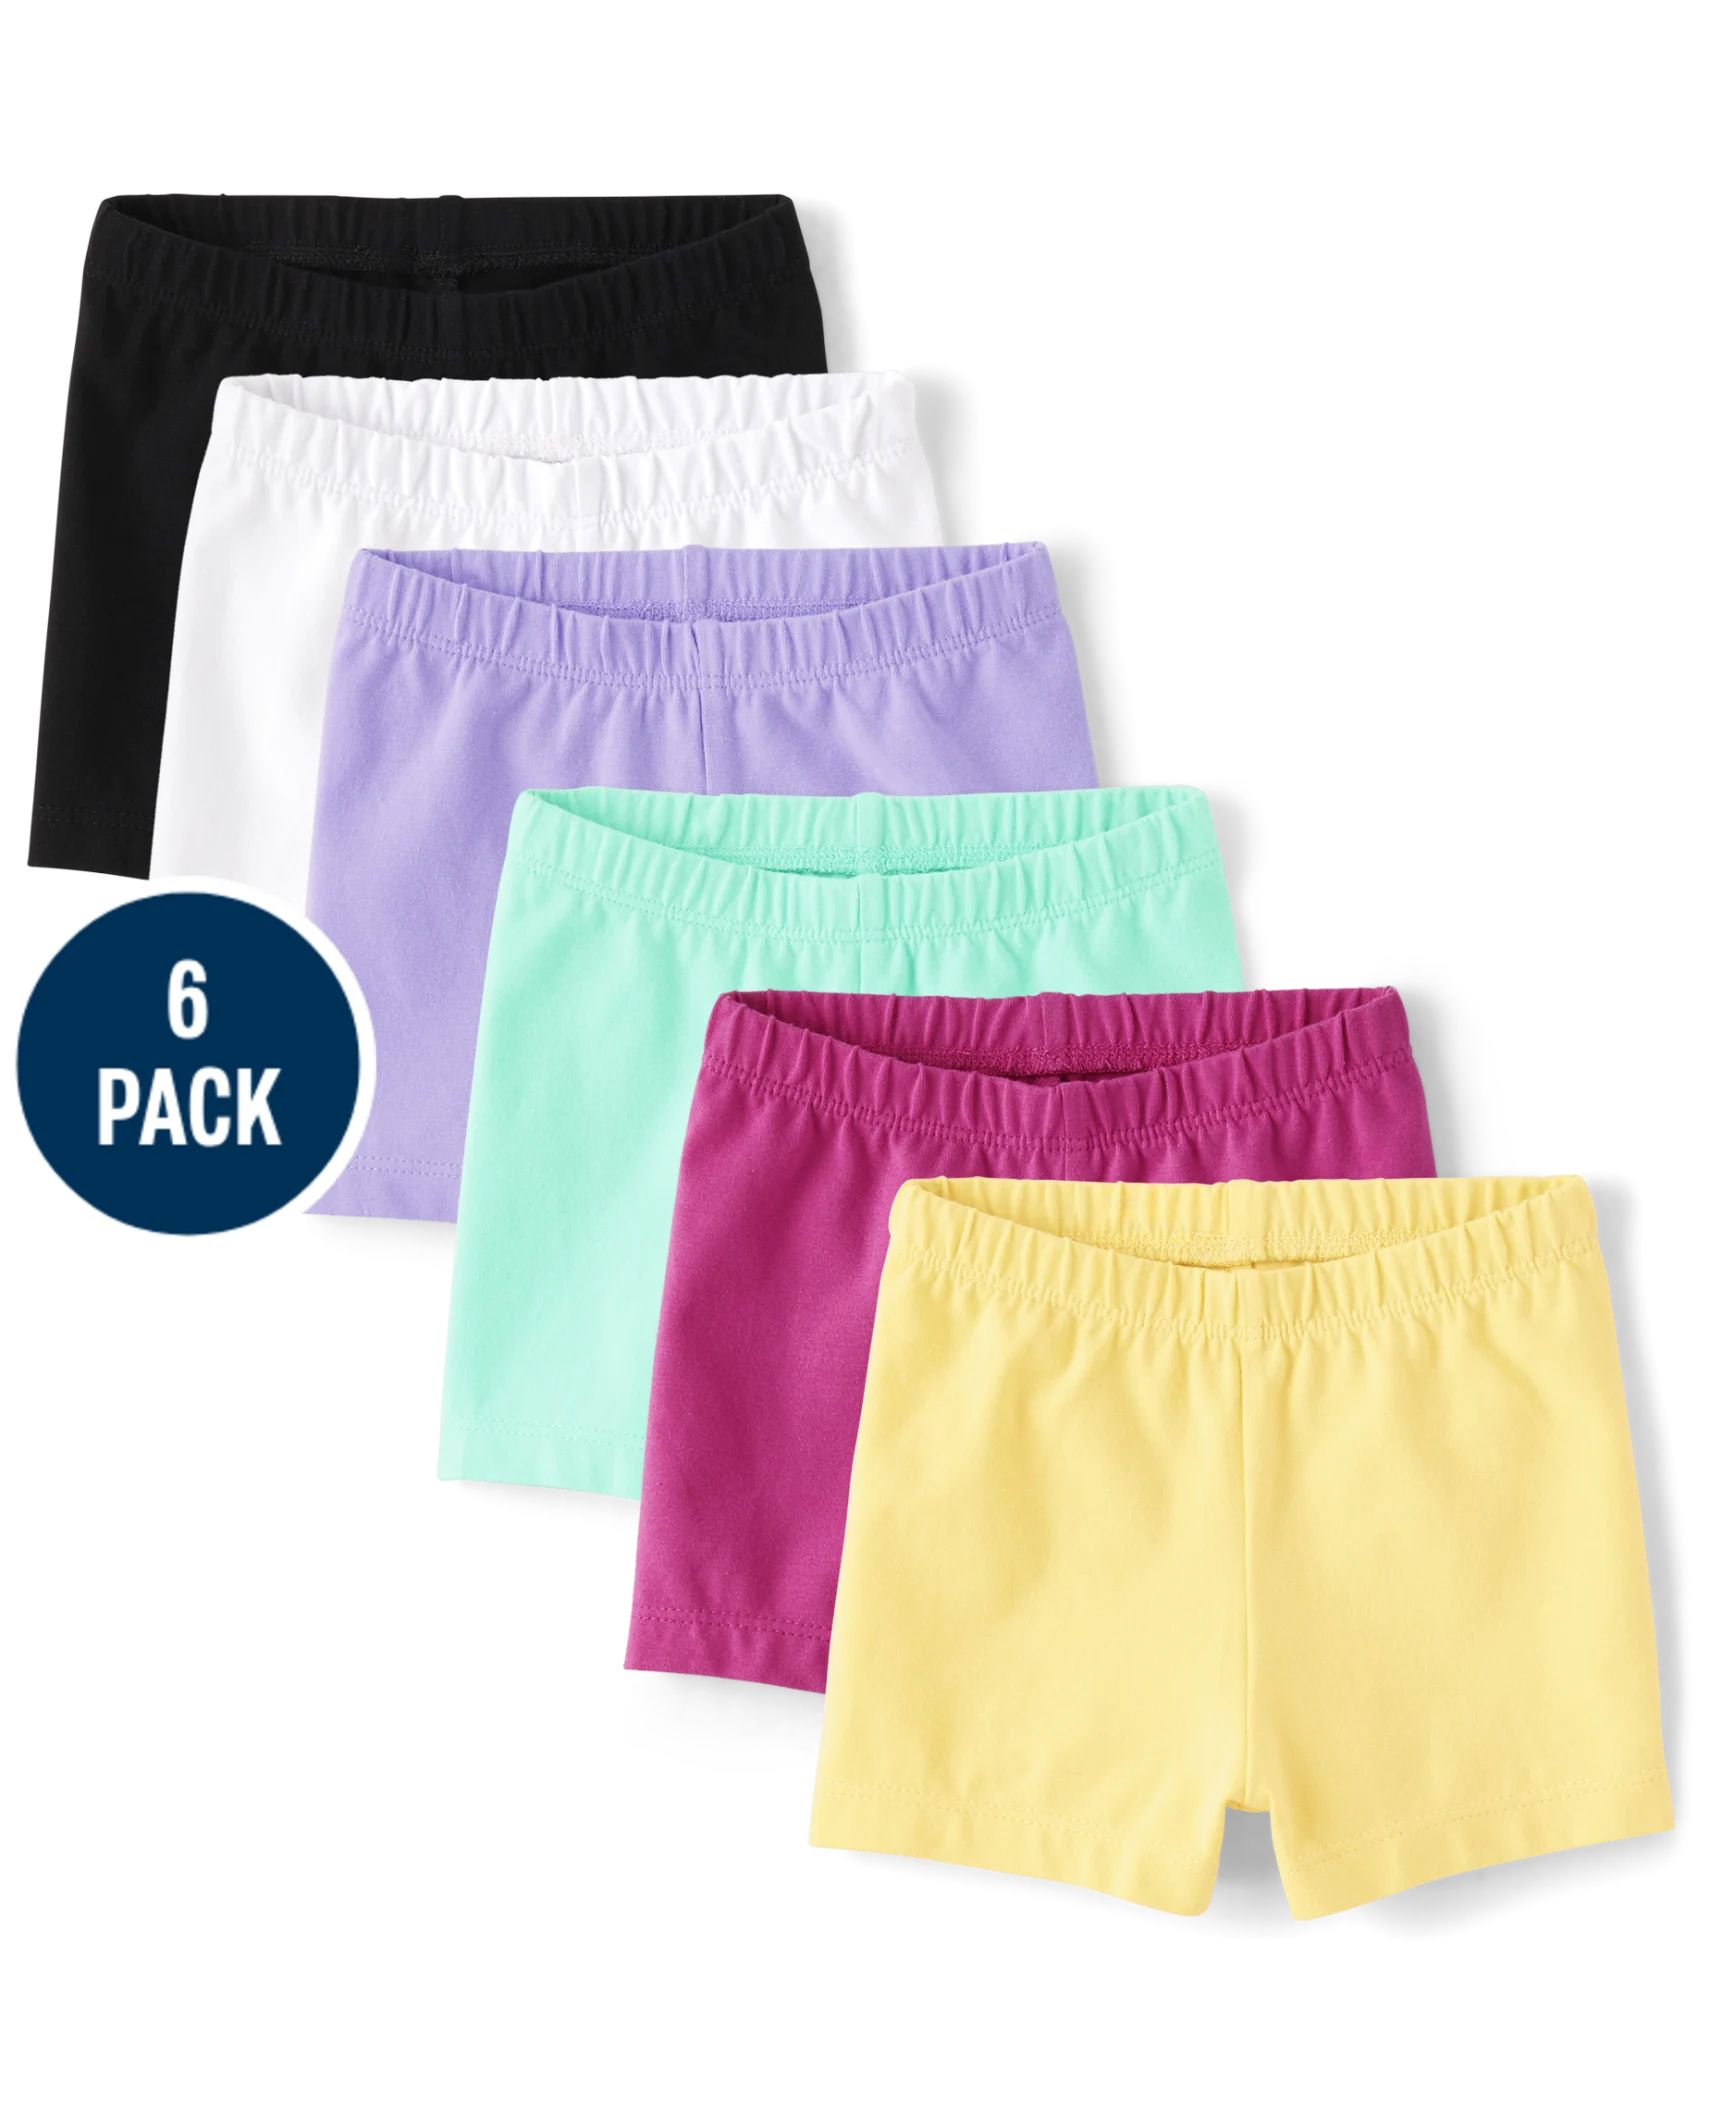 Toddler Girls Cartwheel Shorts 6-Pack - caddy pink | The Children's Place